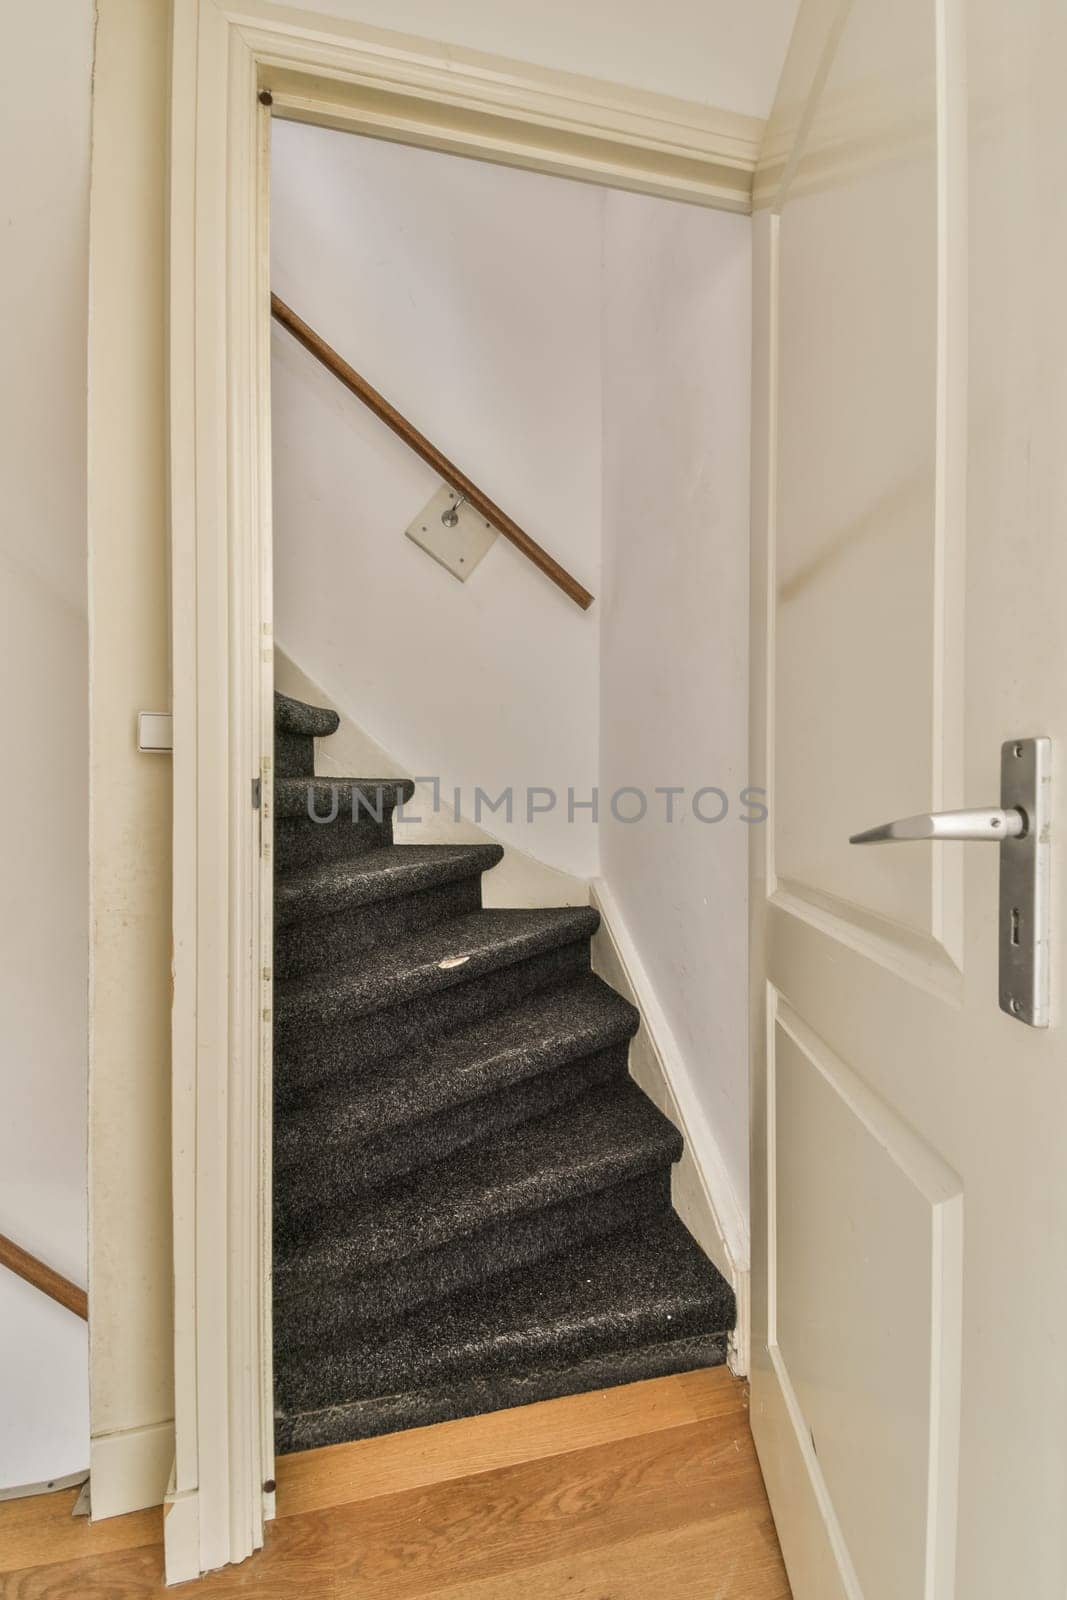 an empty room with stairs and a door leading to the second floor, which is in need of repair work